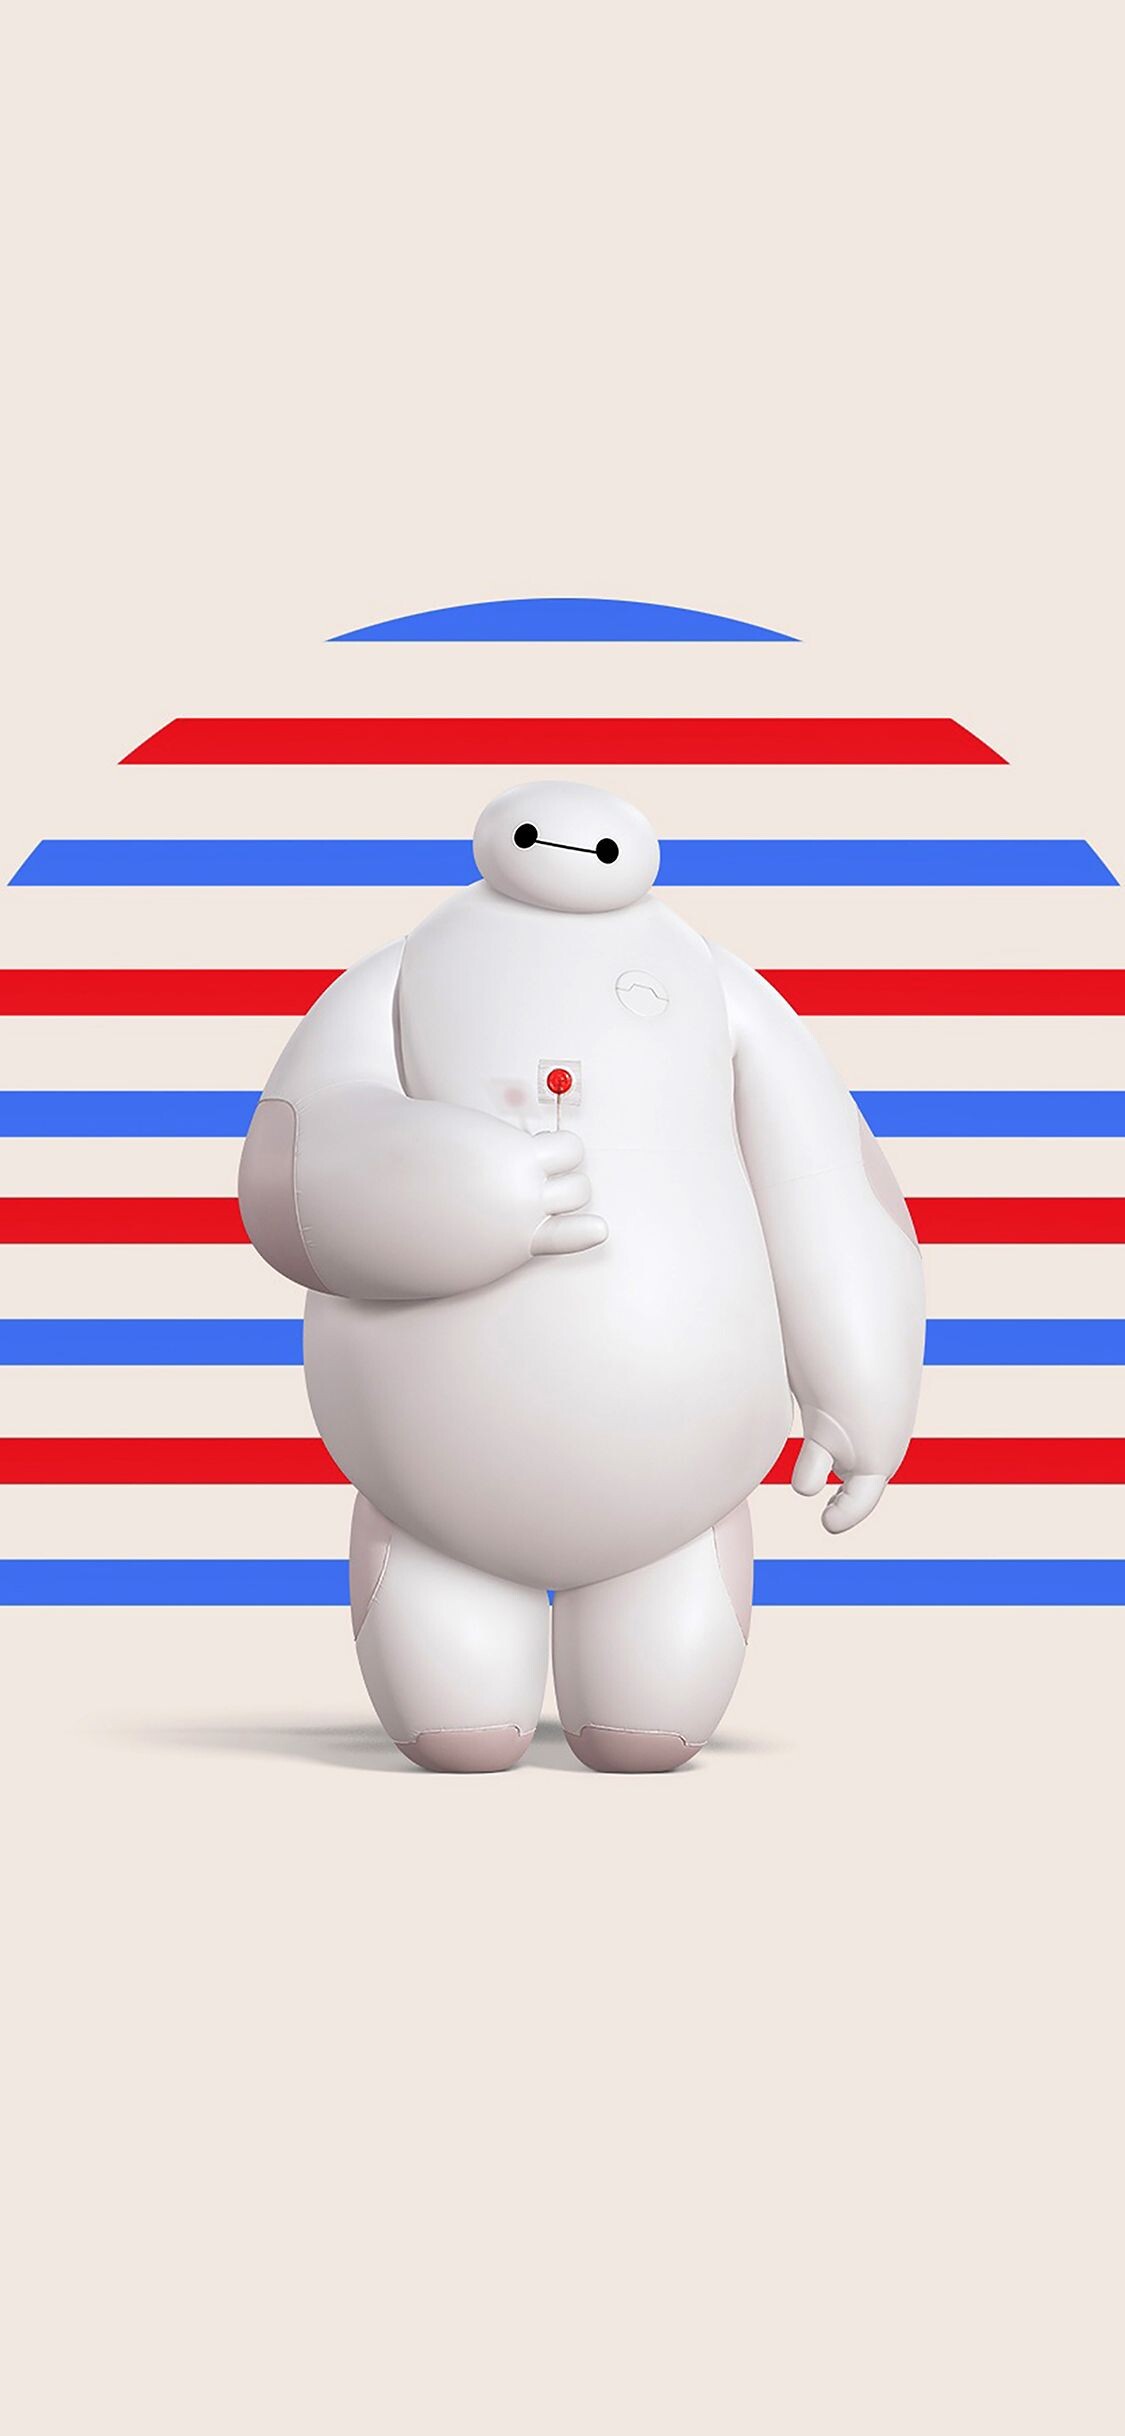 Baymax! (TV Series): Big Hero 6, Cute robot which contains 10,000 different medical procedures. 1130x2440 HD Background.